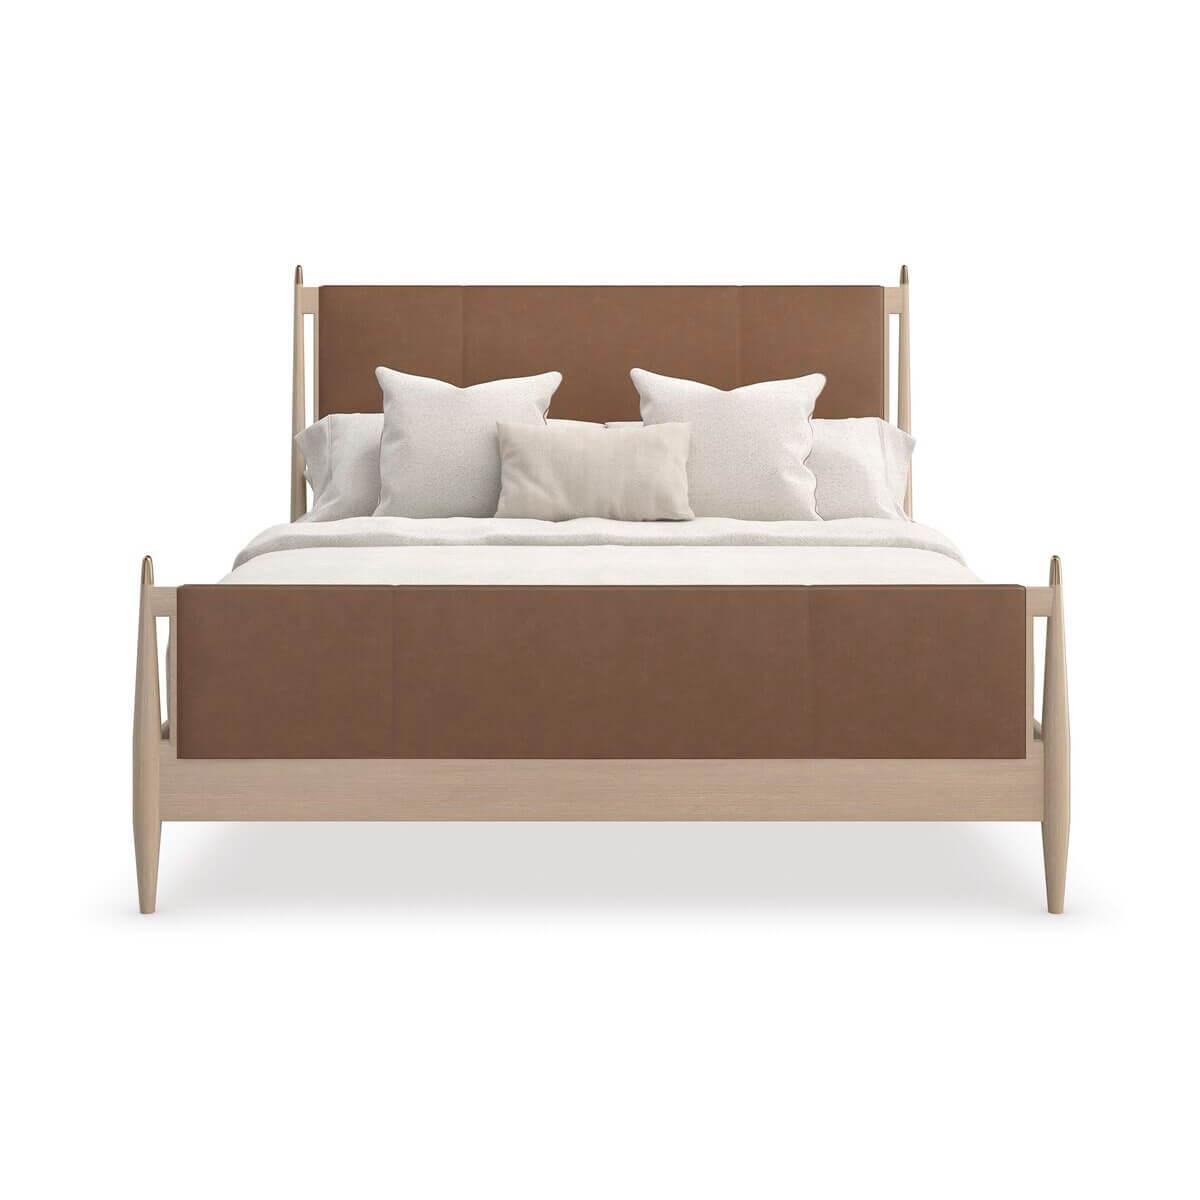 With simple modern lines and a rich use of material, the bed brings a simple yet sophisticated cadence to bedroom interiors. Tailored in a lavish, camel-colored leather, its clean, parsons-style headboard warmly complements a Sun Drenched Oak wood